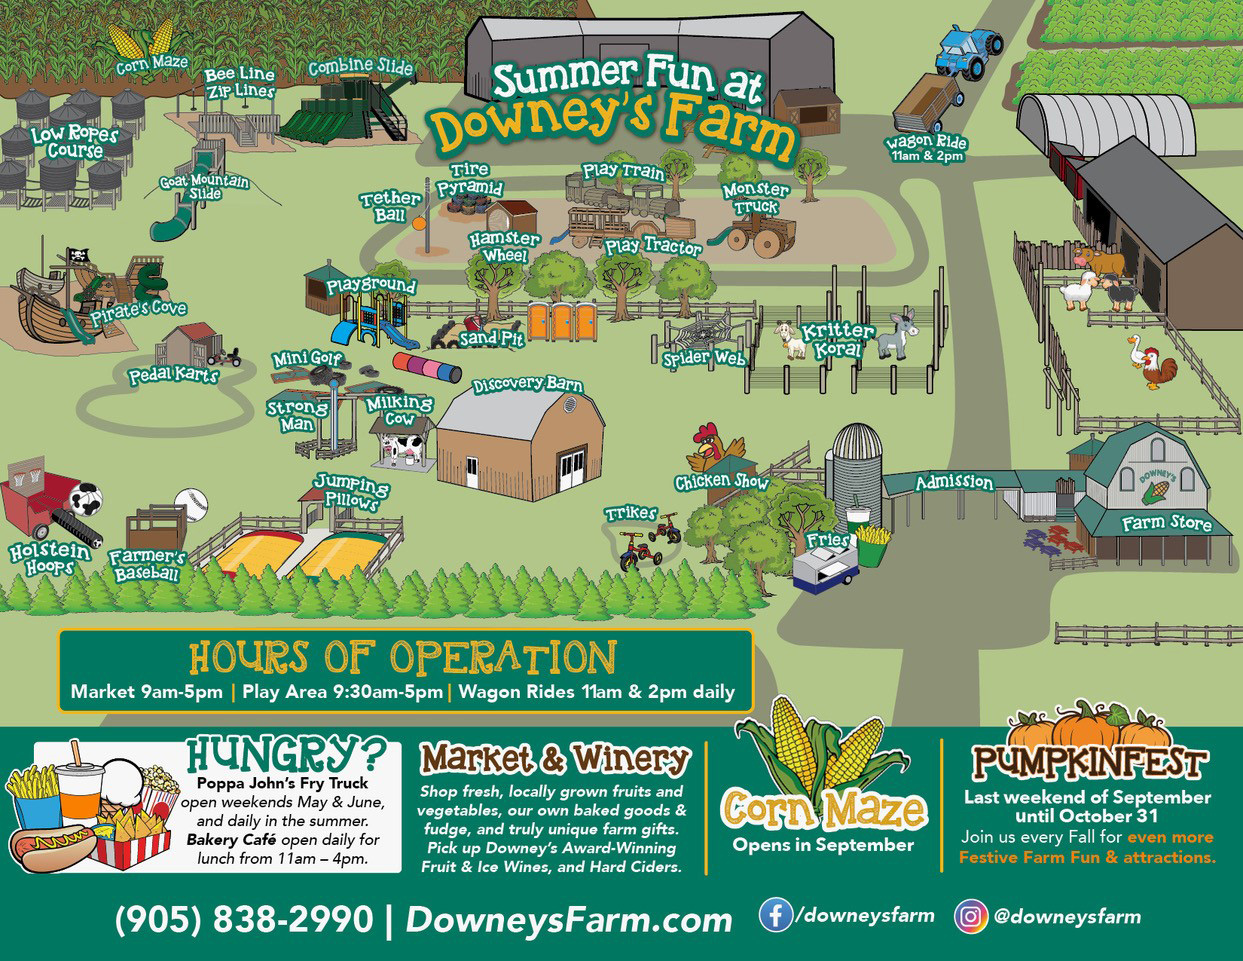 Explore the farm fun activities at Downey's Farm in Caledon, ON.